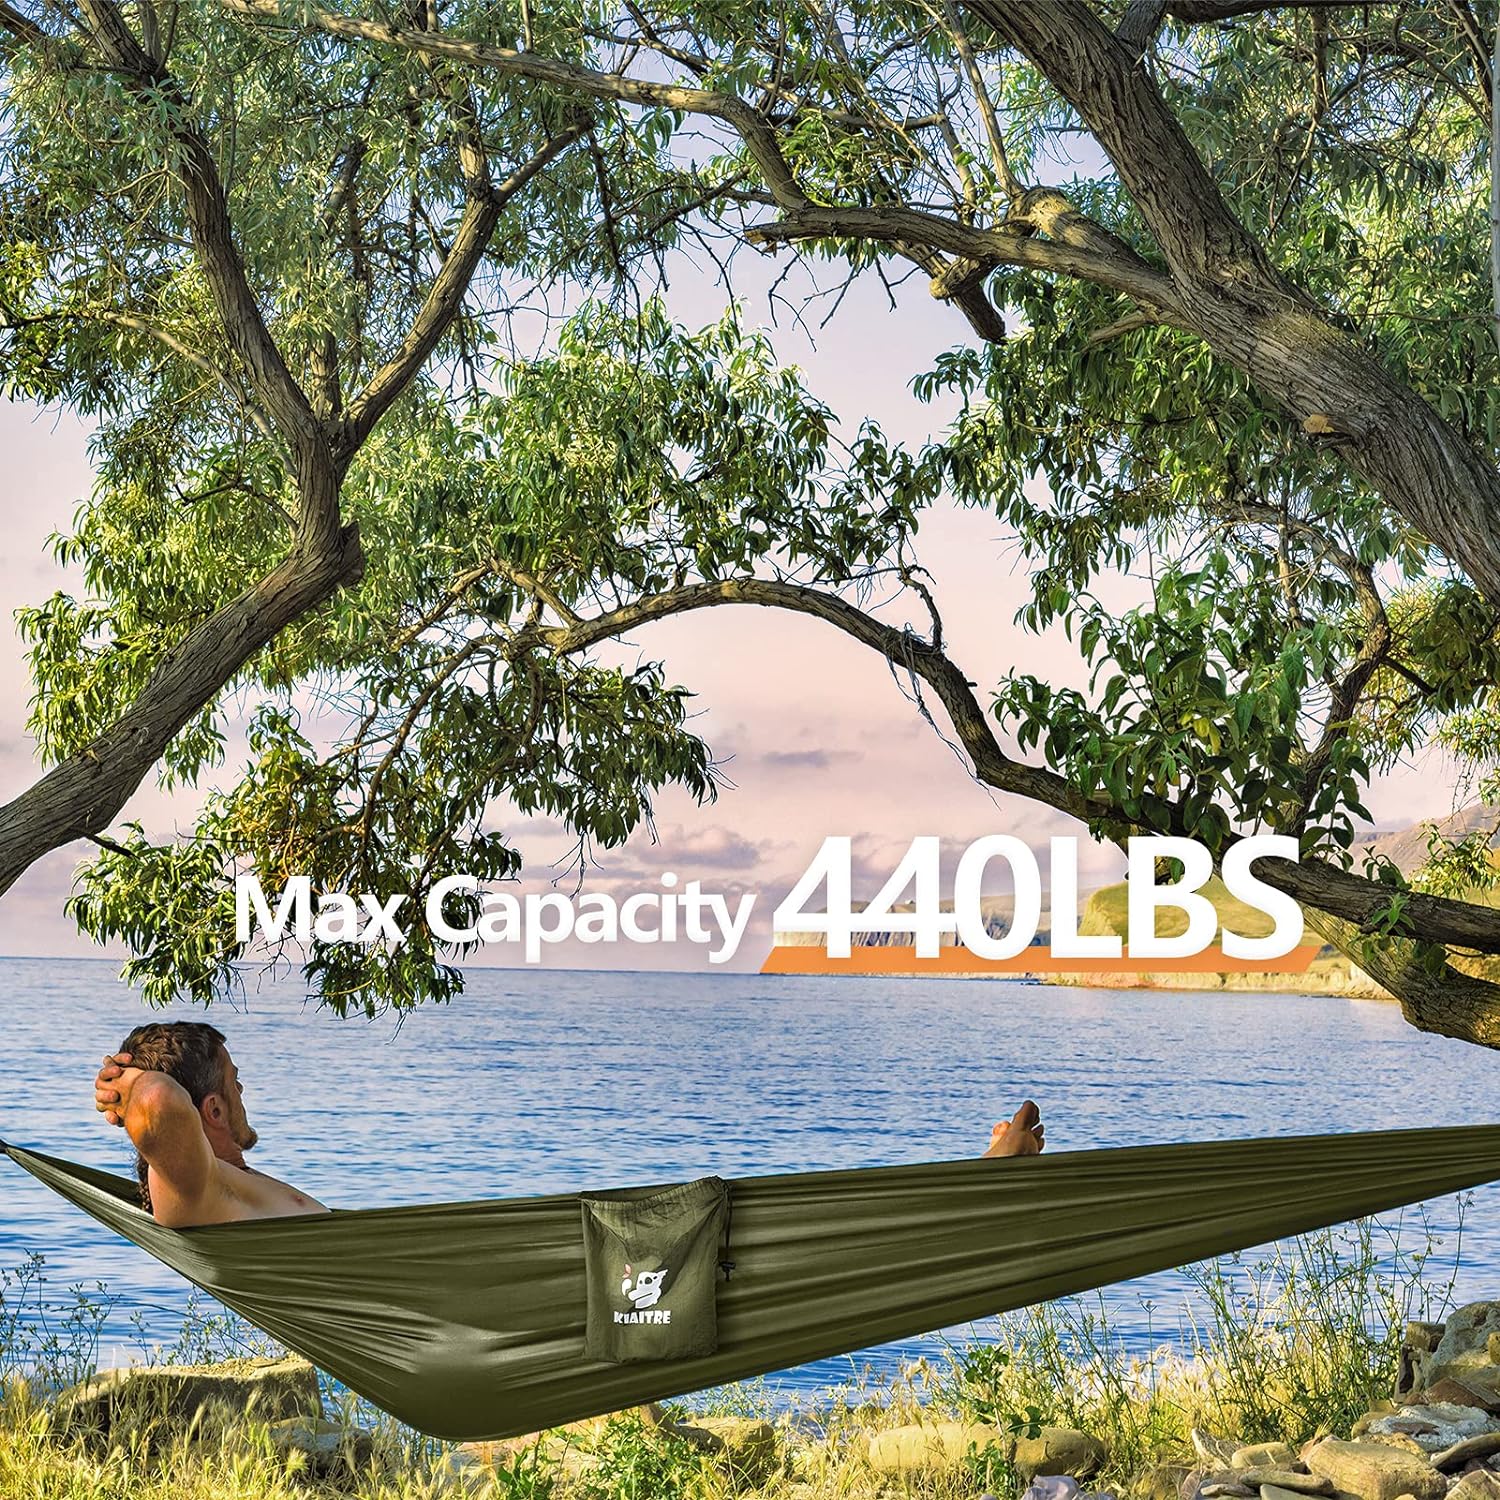 Kiaitre Camping Hammock with Mosquito Net - 210T Quick-drying Parachute Nylon Lightweight Portable Travel Hammock for Outdoor, Backpacking, Camping, Hiking and Beach Adventure : Amazon.co.uk: Sports  Outdoors